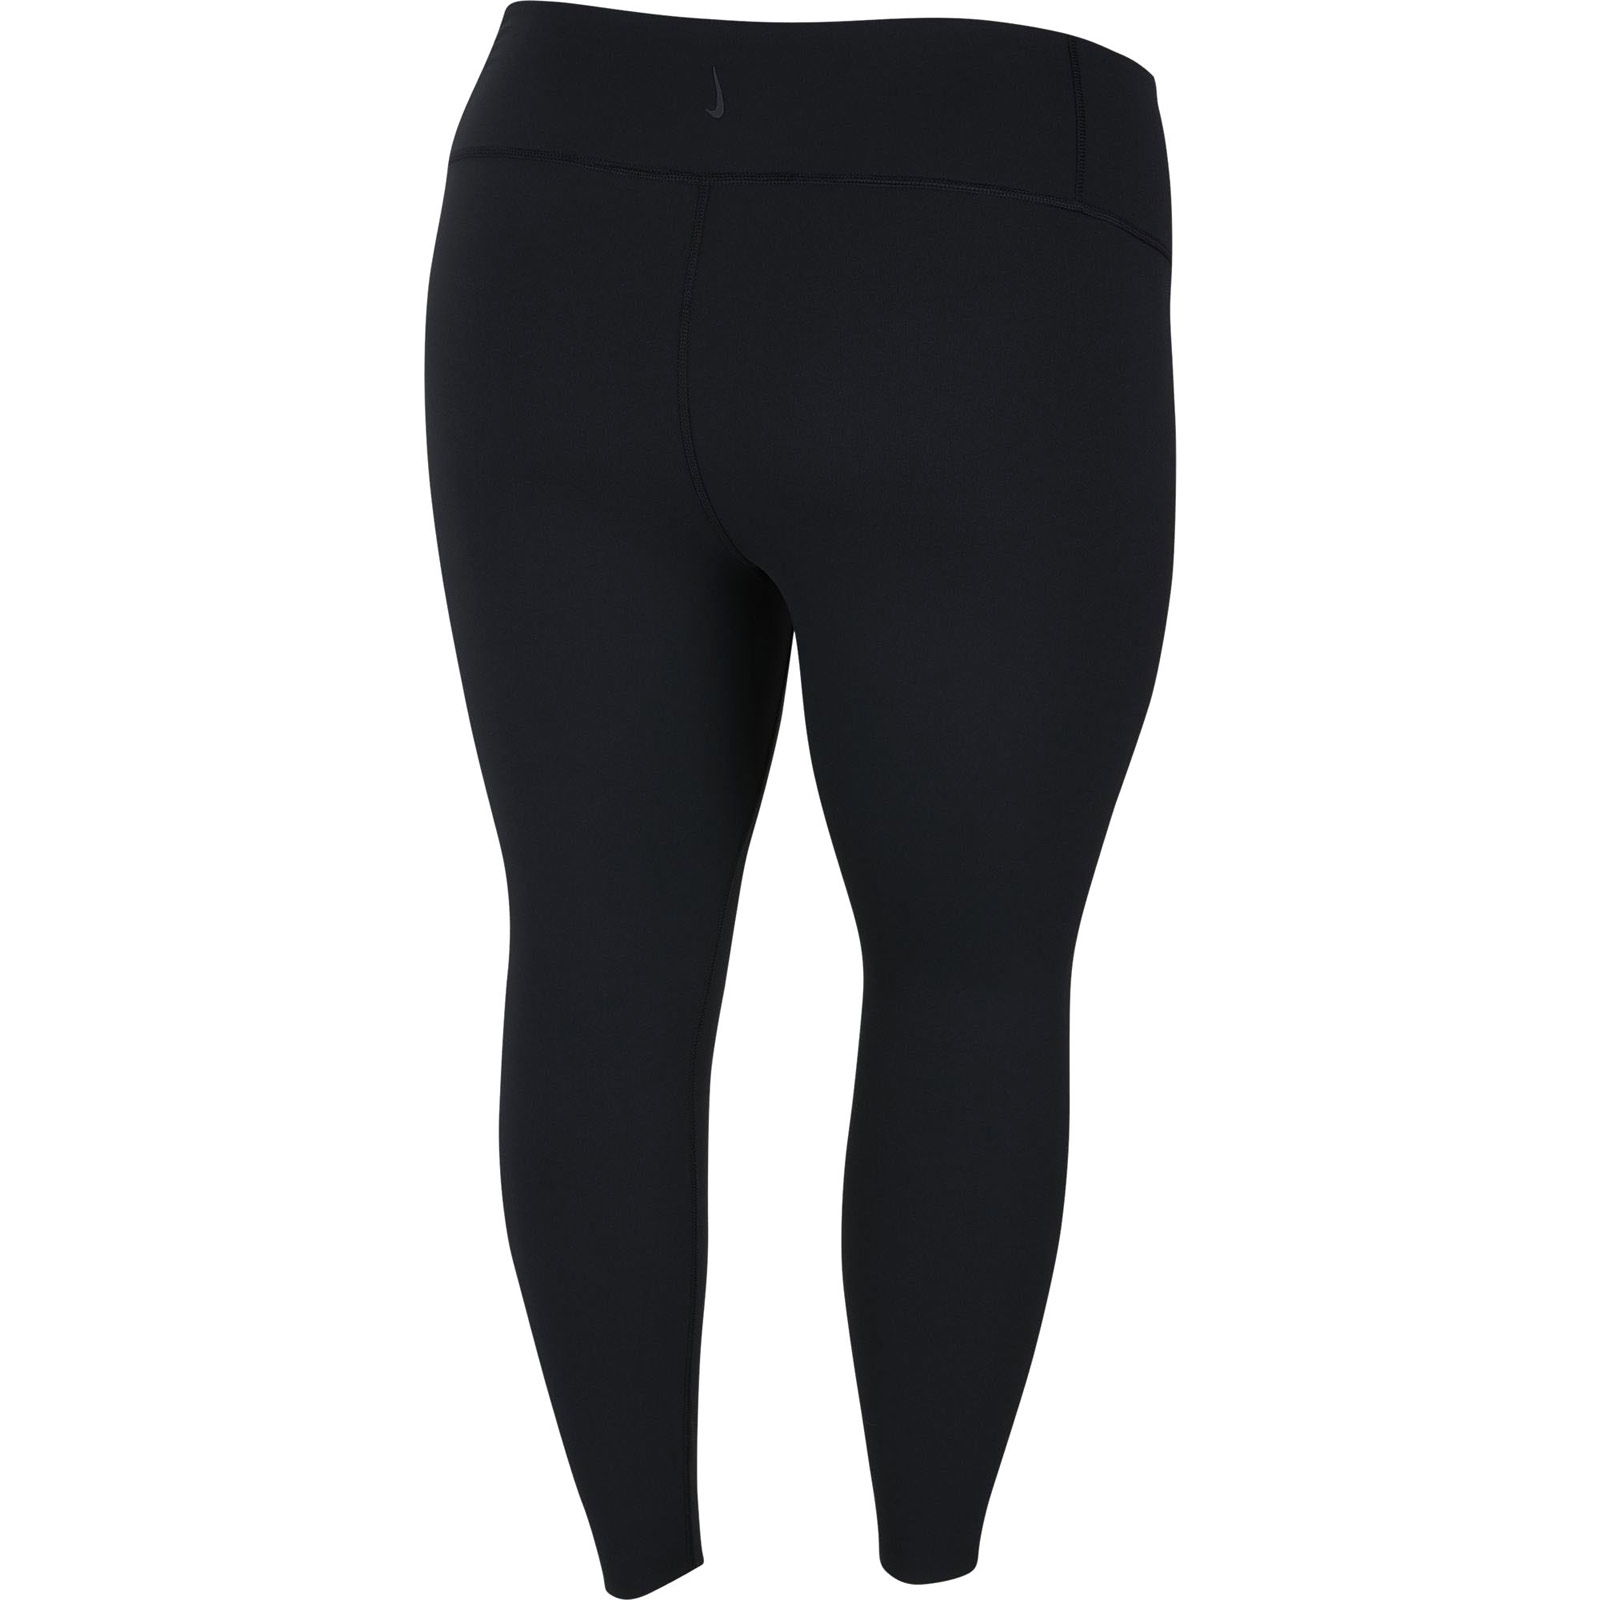 NIKE YOGA LUXE WOMENS 7/8 TIGHTS (PLUS SIZE)